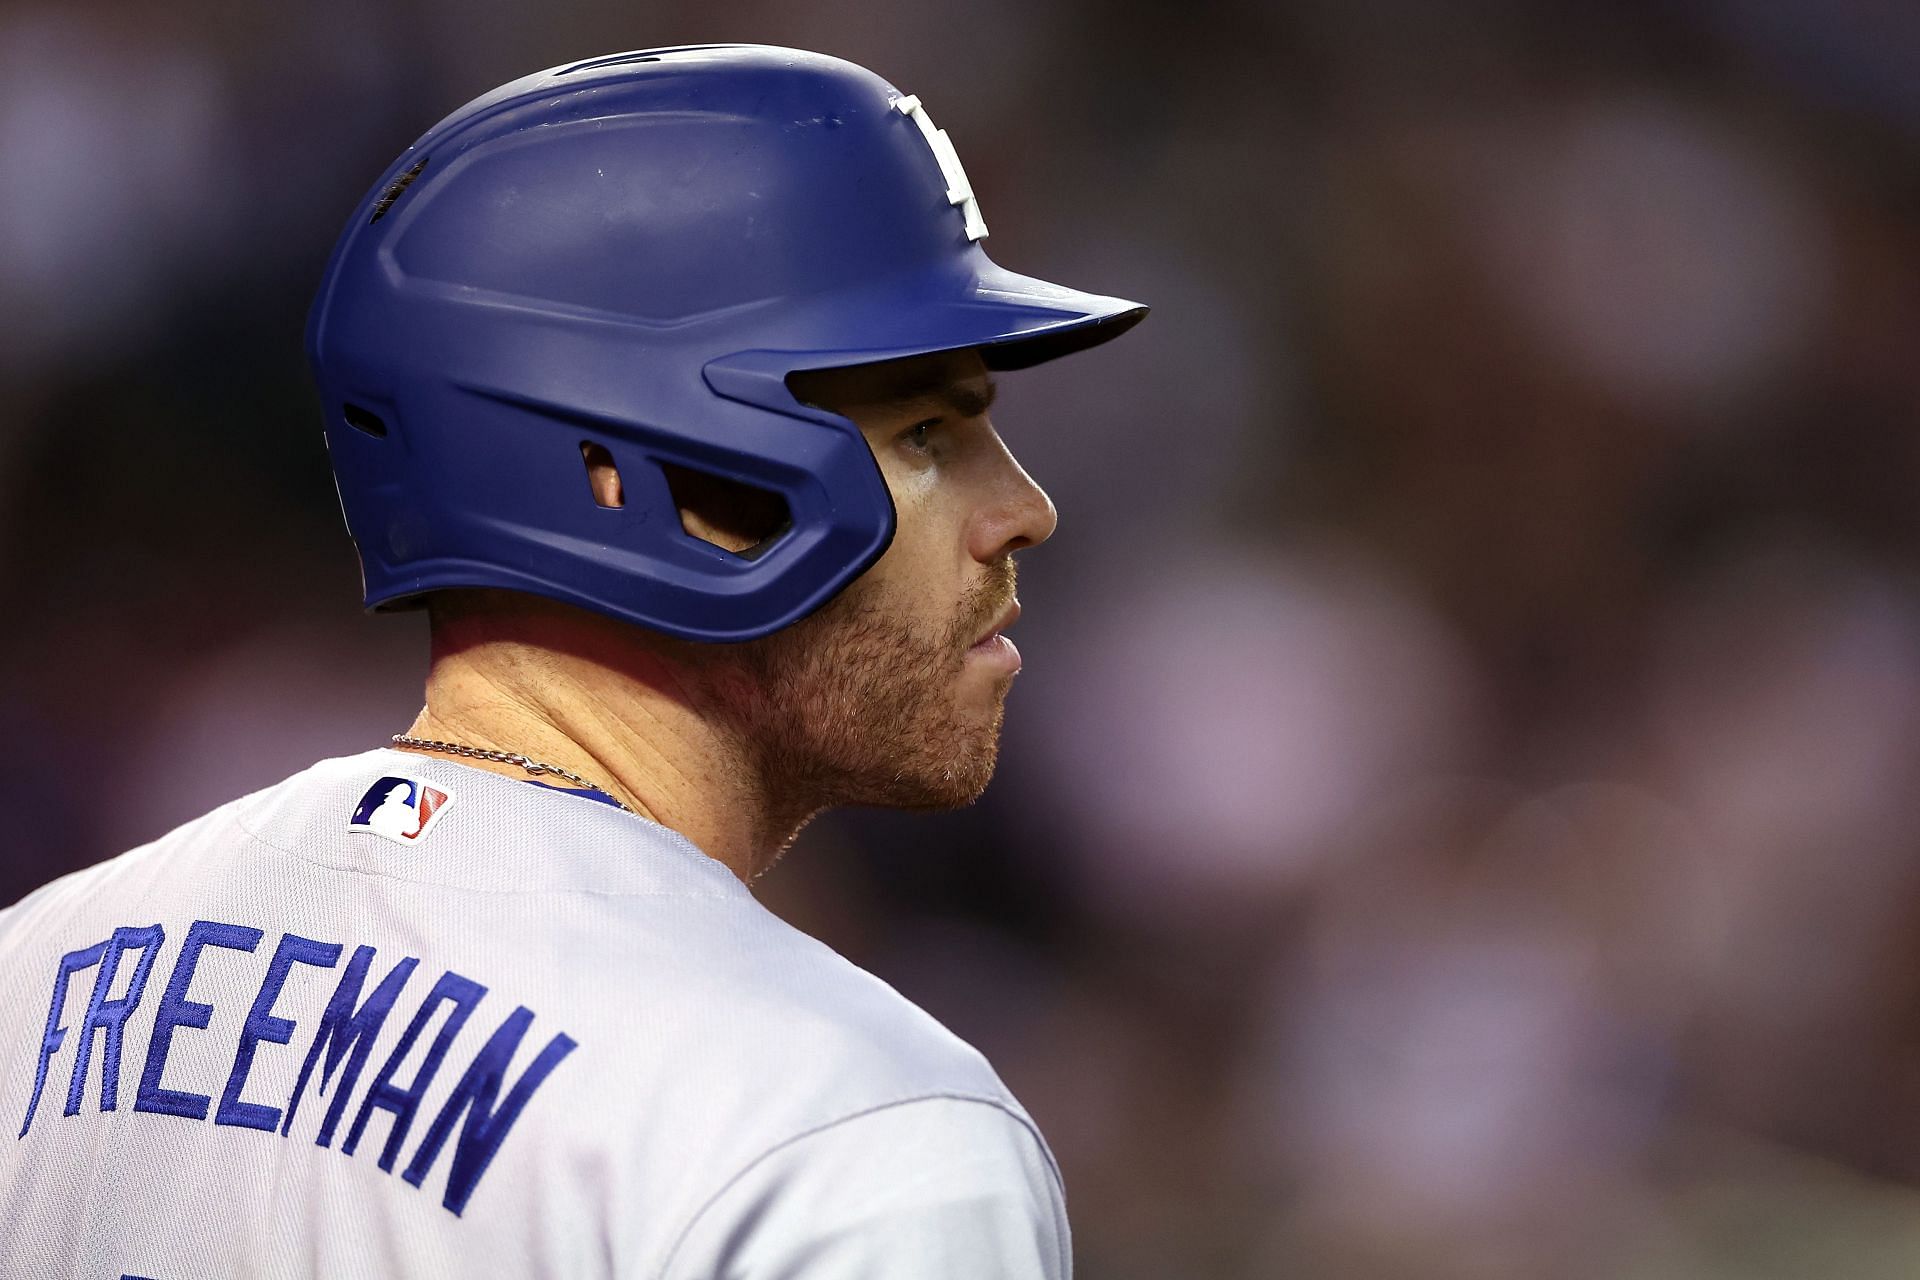 Freddie Freeman #5 of the Los Angeles Dodgers stands on-deck during the sixth inning of the MLB game against the Arizona Diamondbacks